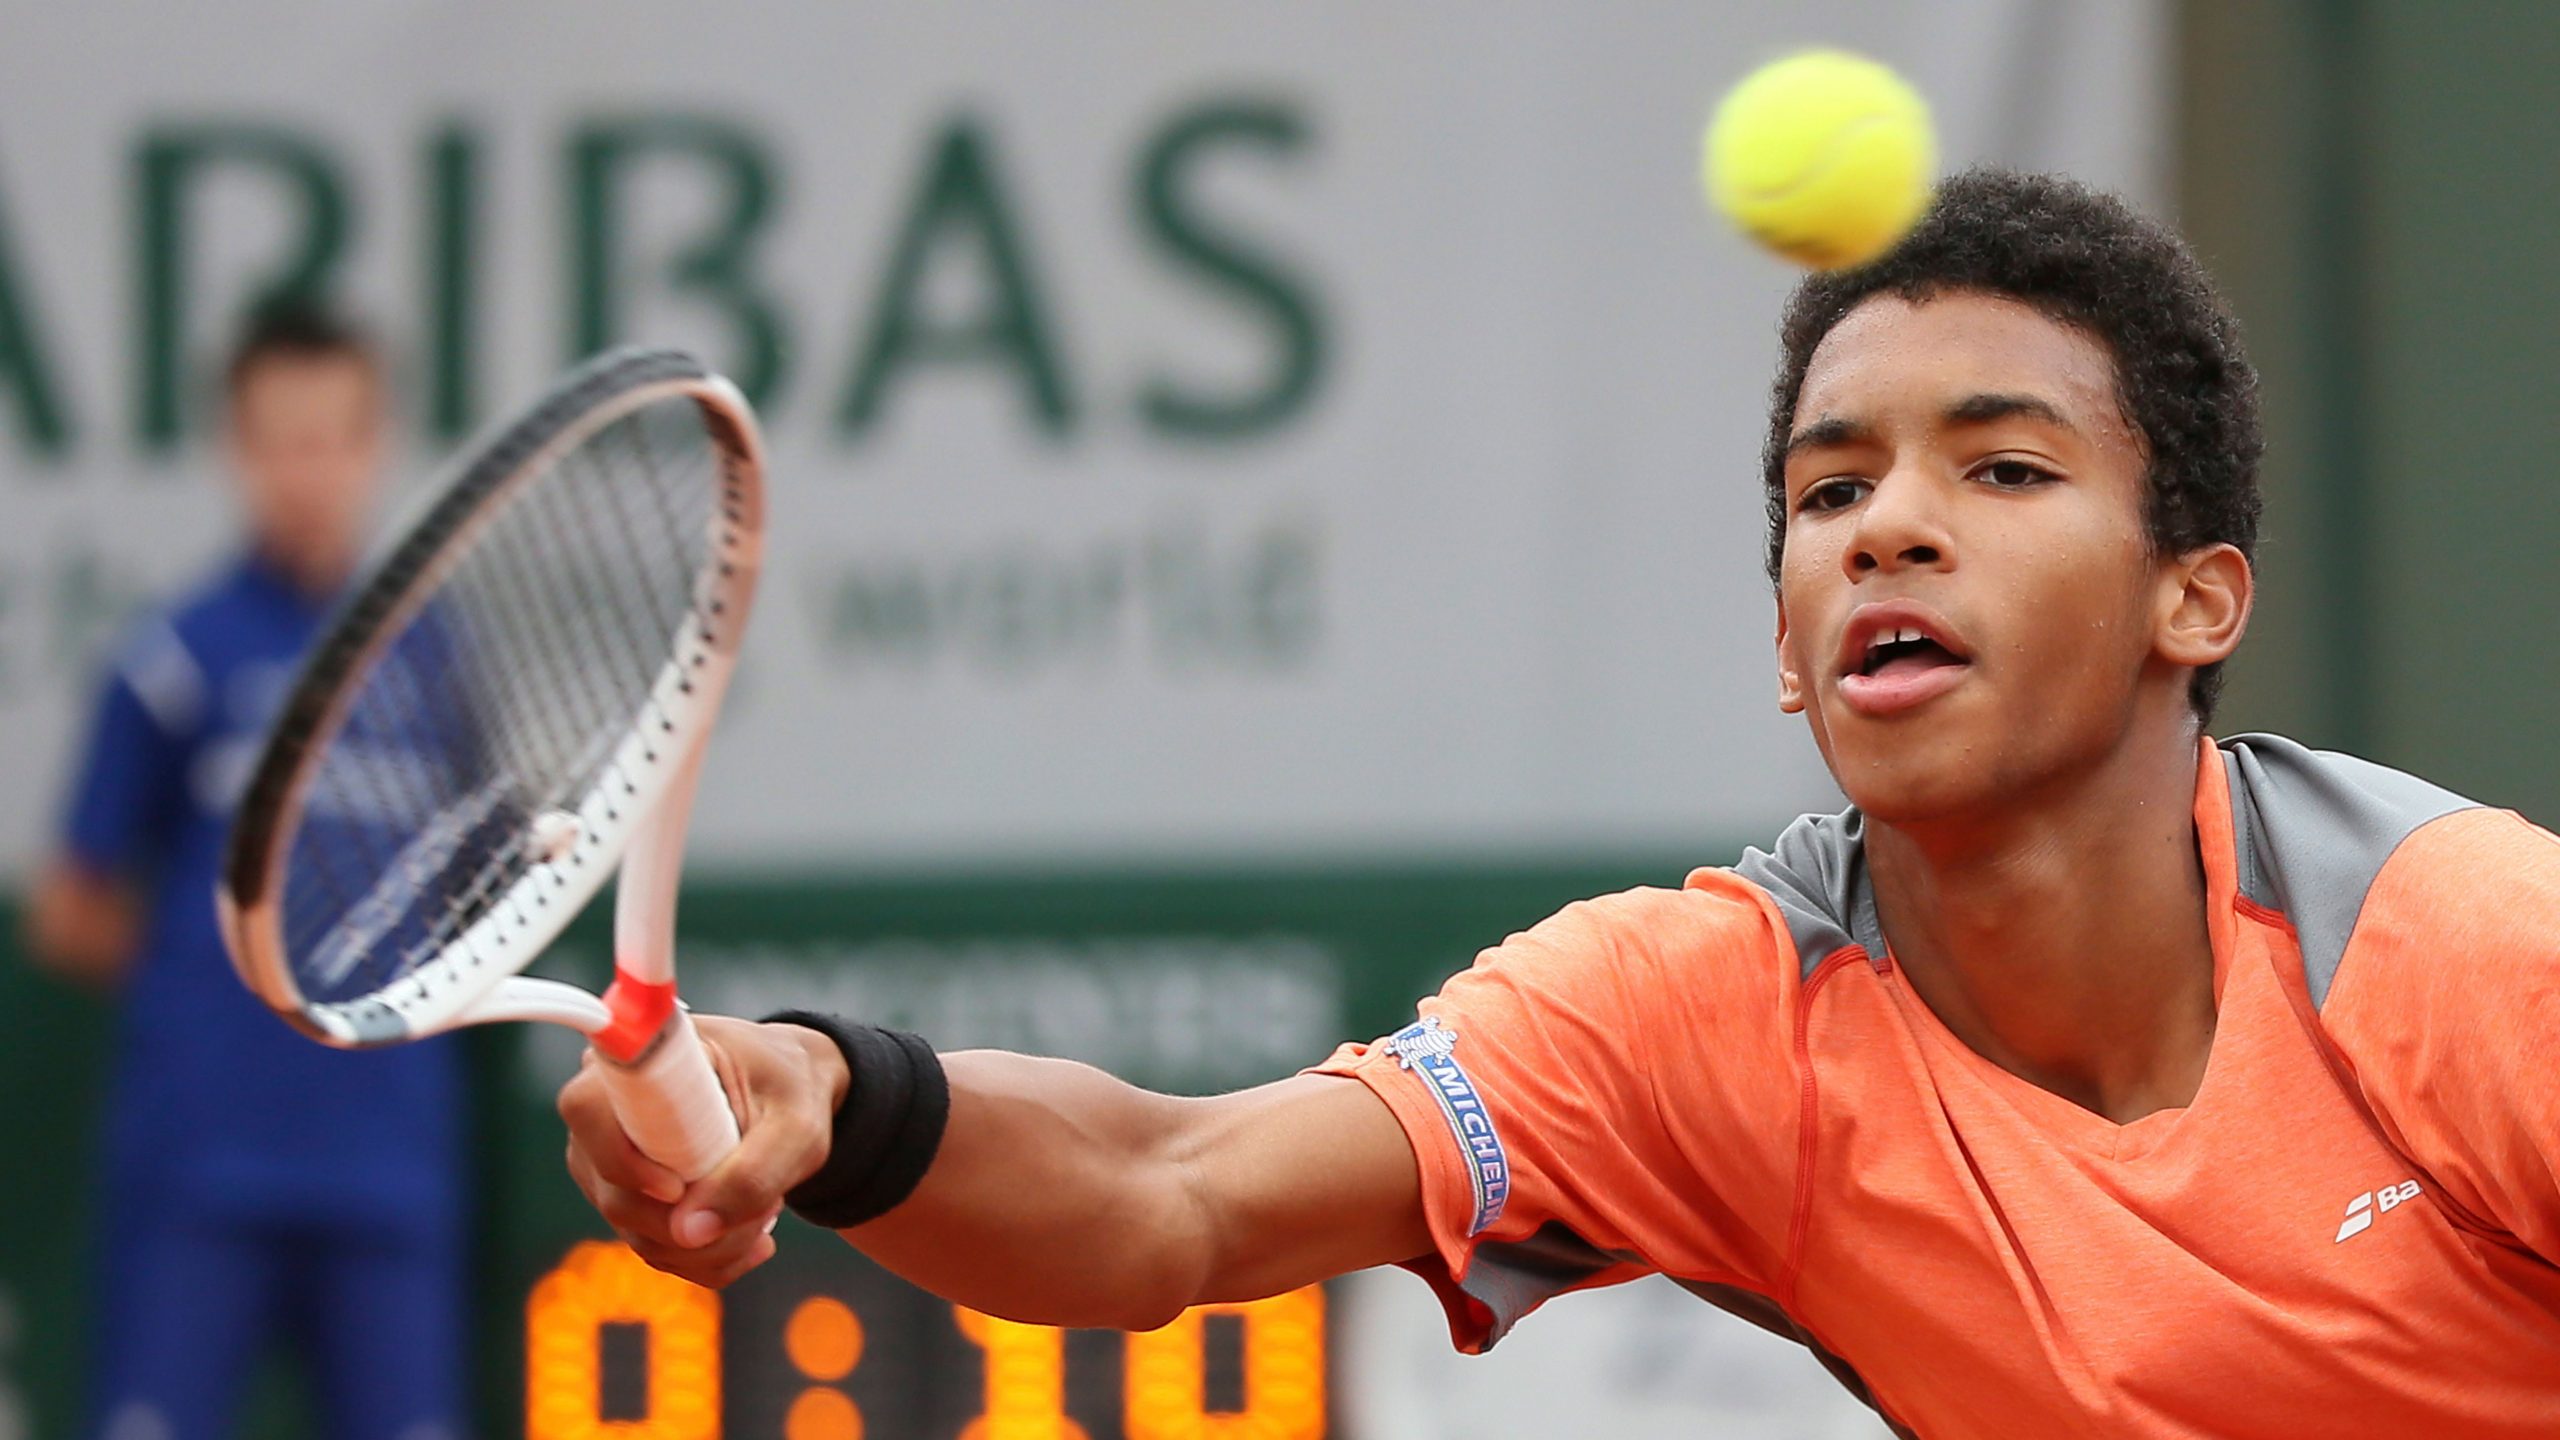 Canadian Felix Auger-Aliassime loses in French Open boys final